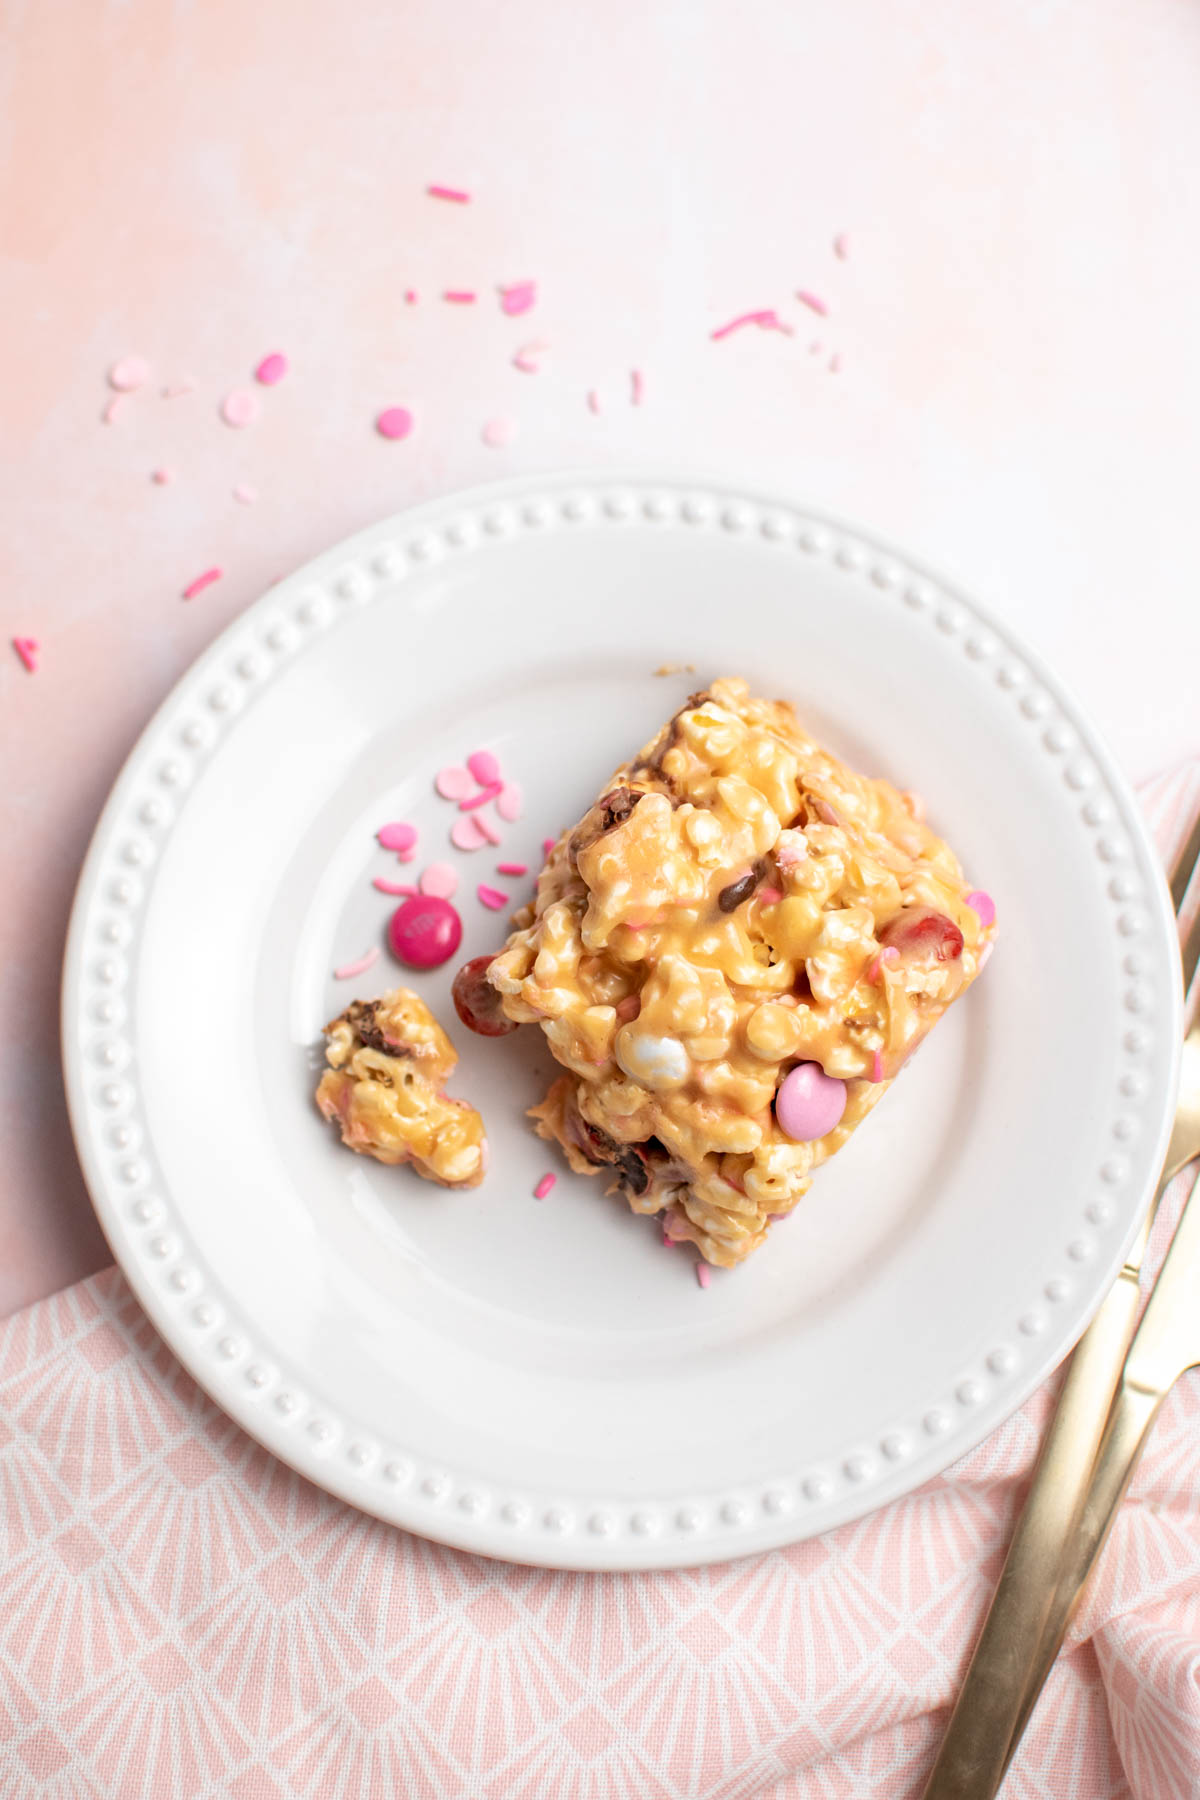 Piece of caramel popcorn cake on white plate with pink sprinkles and candies scattered around.